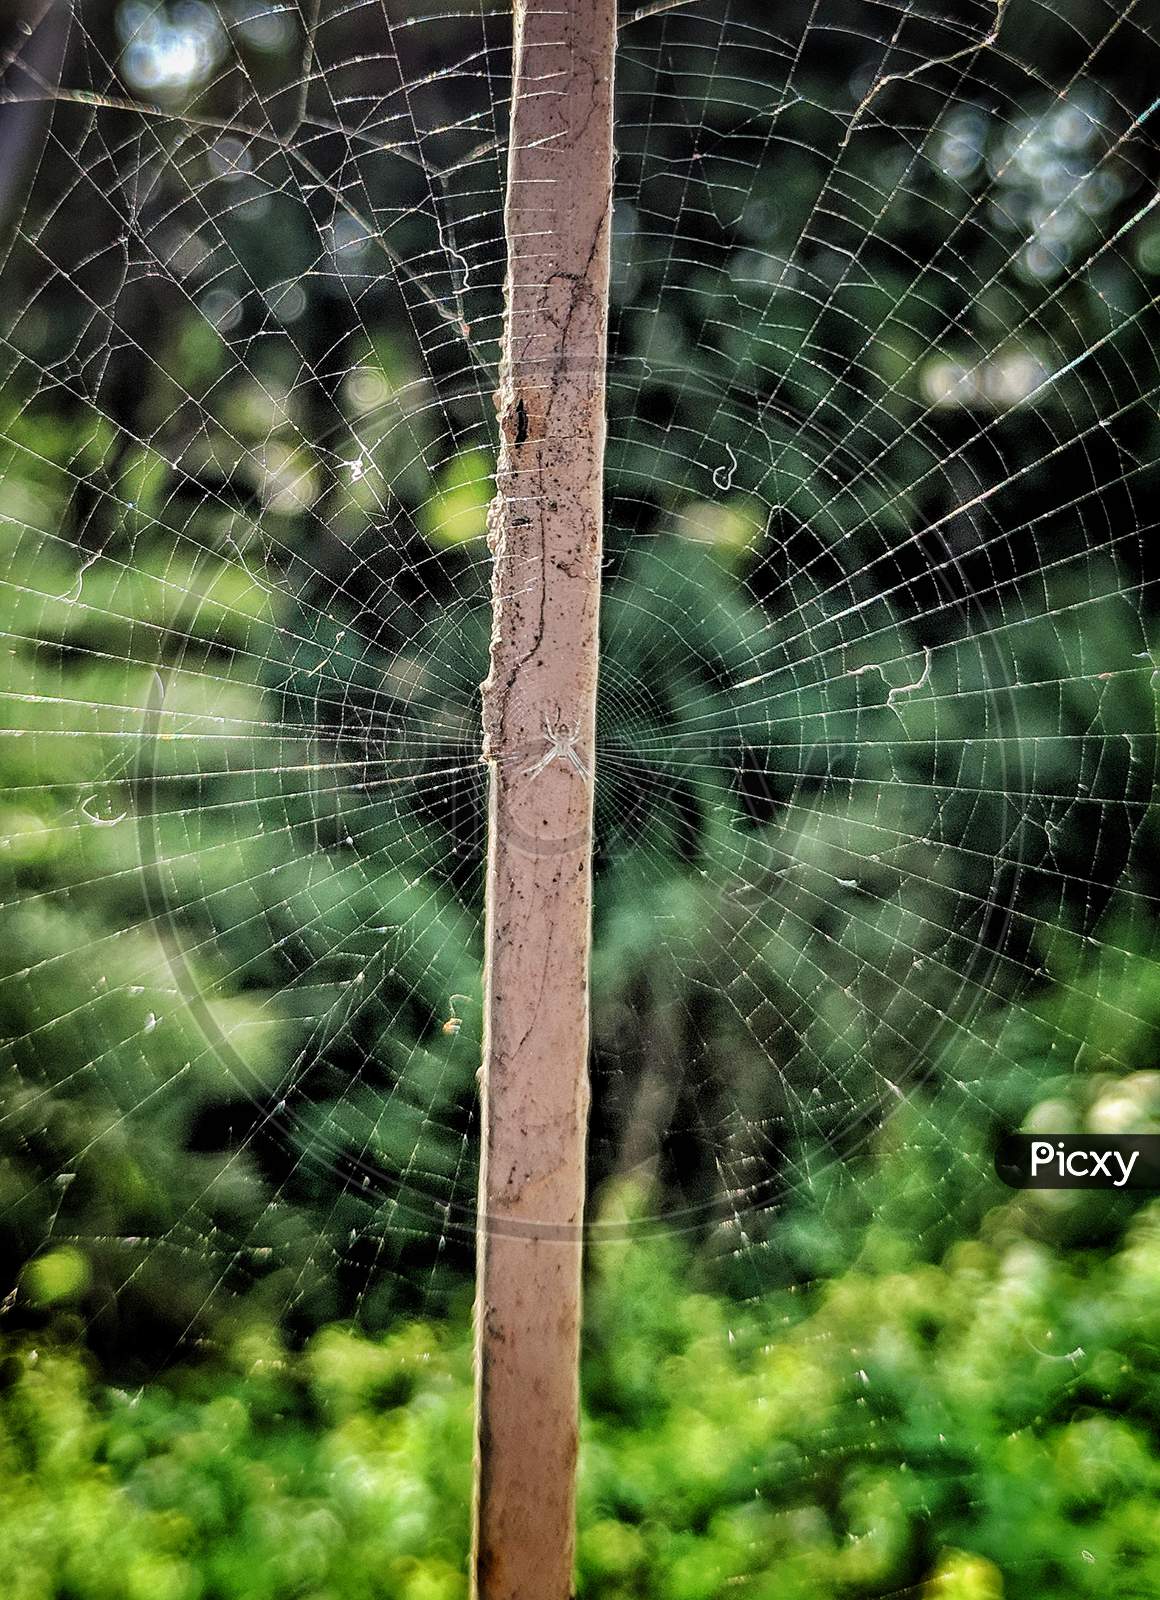 A Complete White Spider Web In The Nature